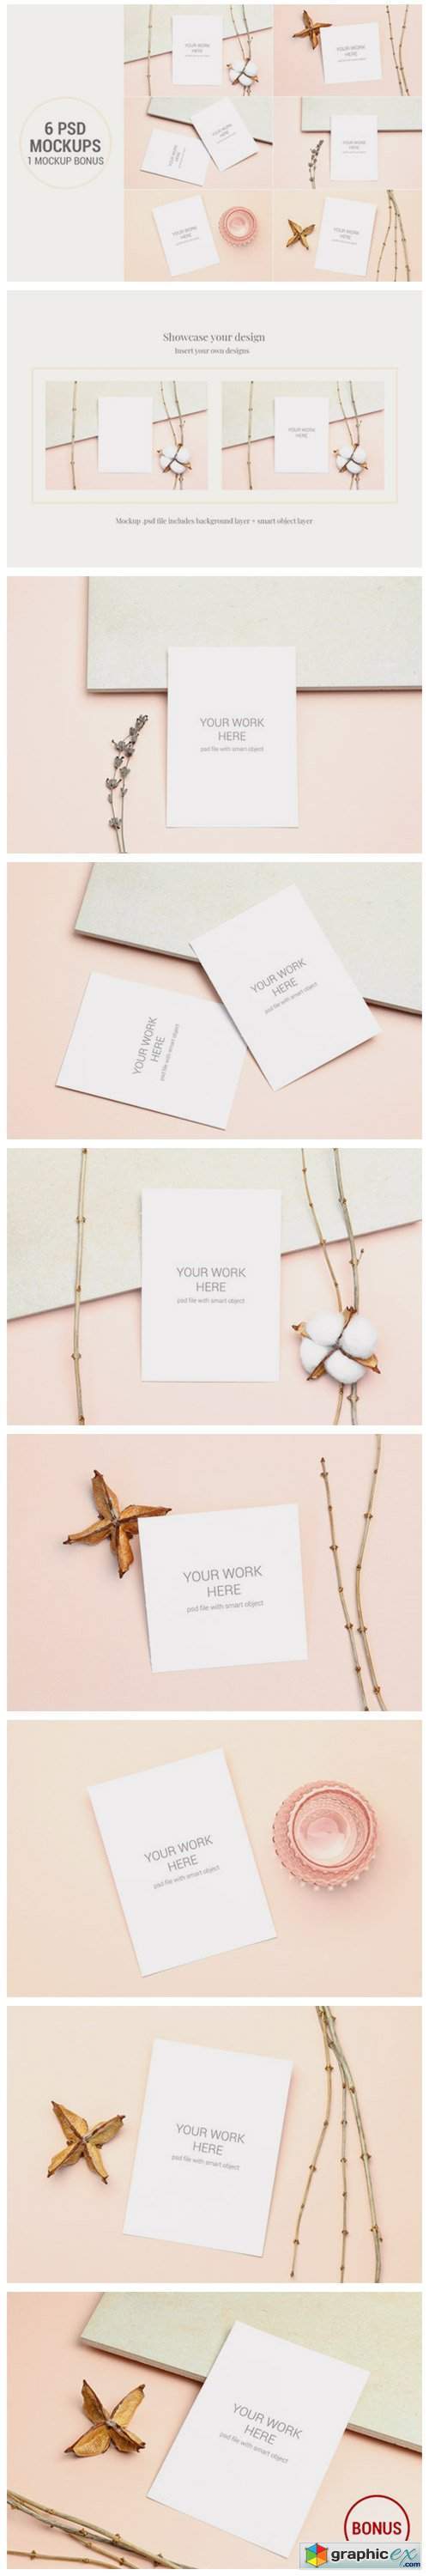 Invitation Card Mockups with Branches